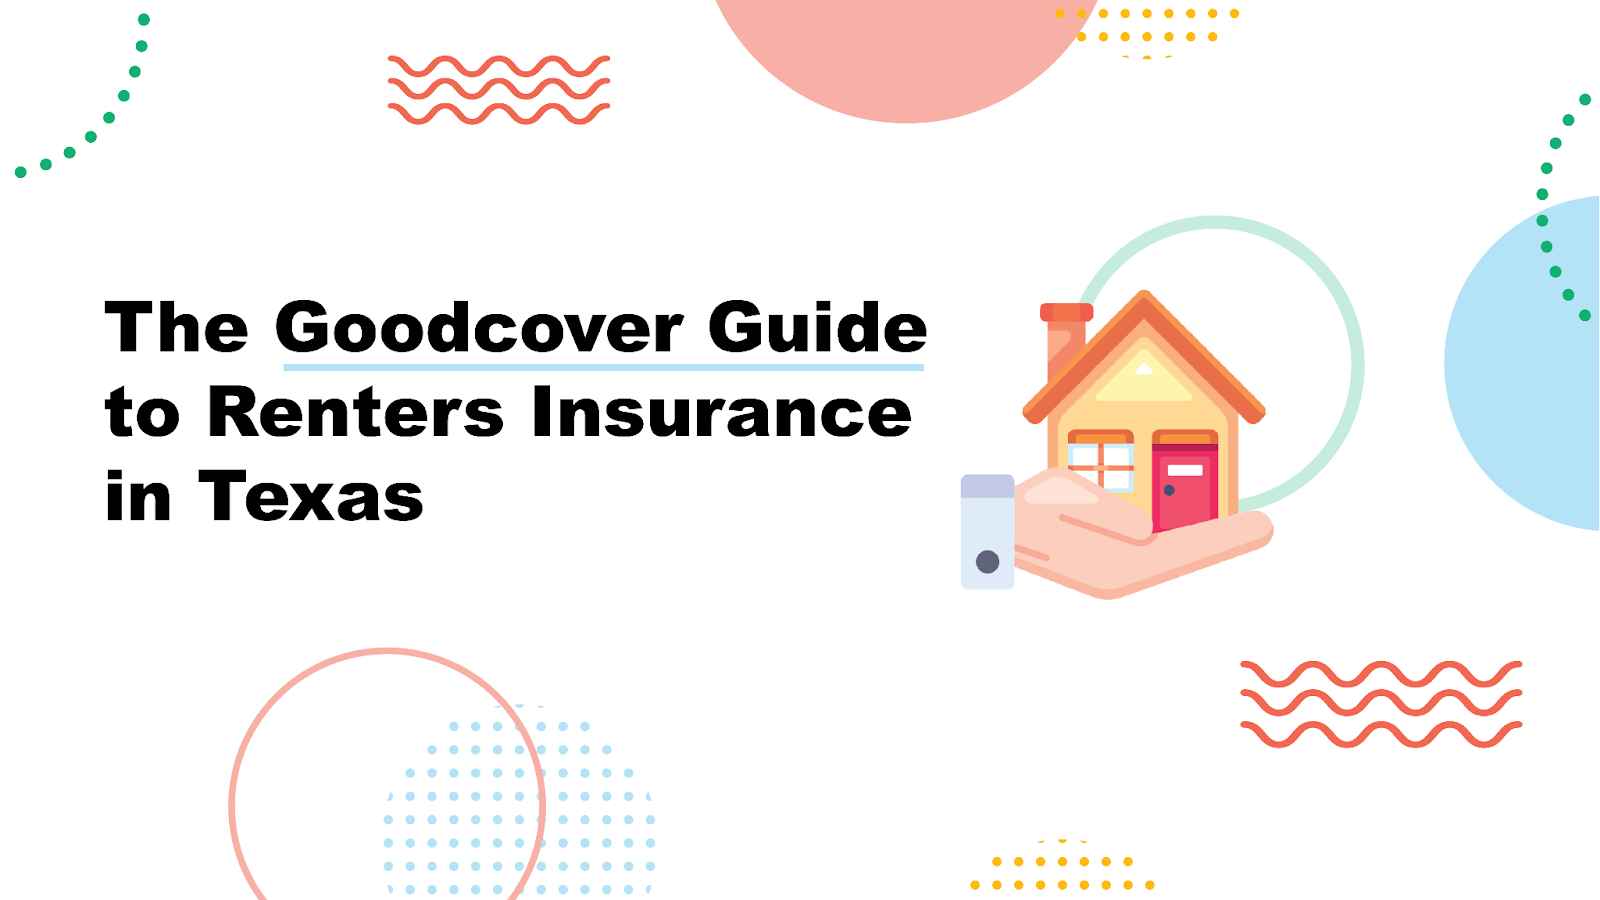 The Goodcover Guide to Renters Insurance in Texas